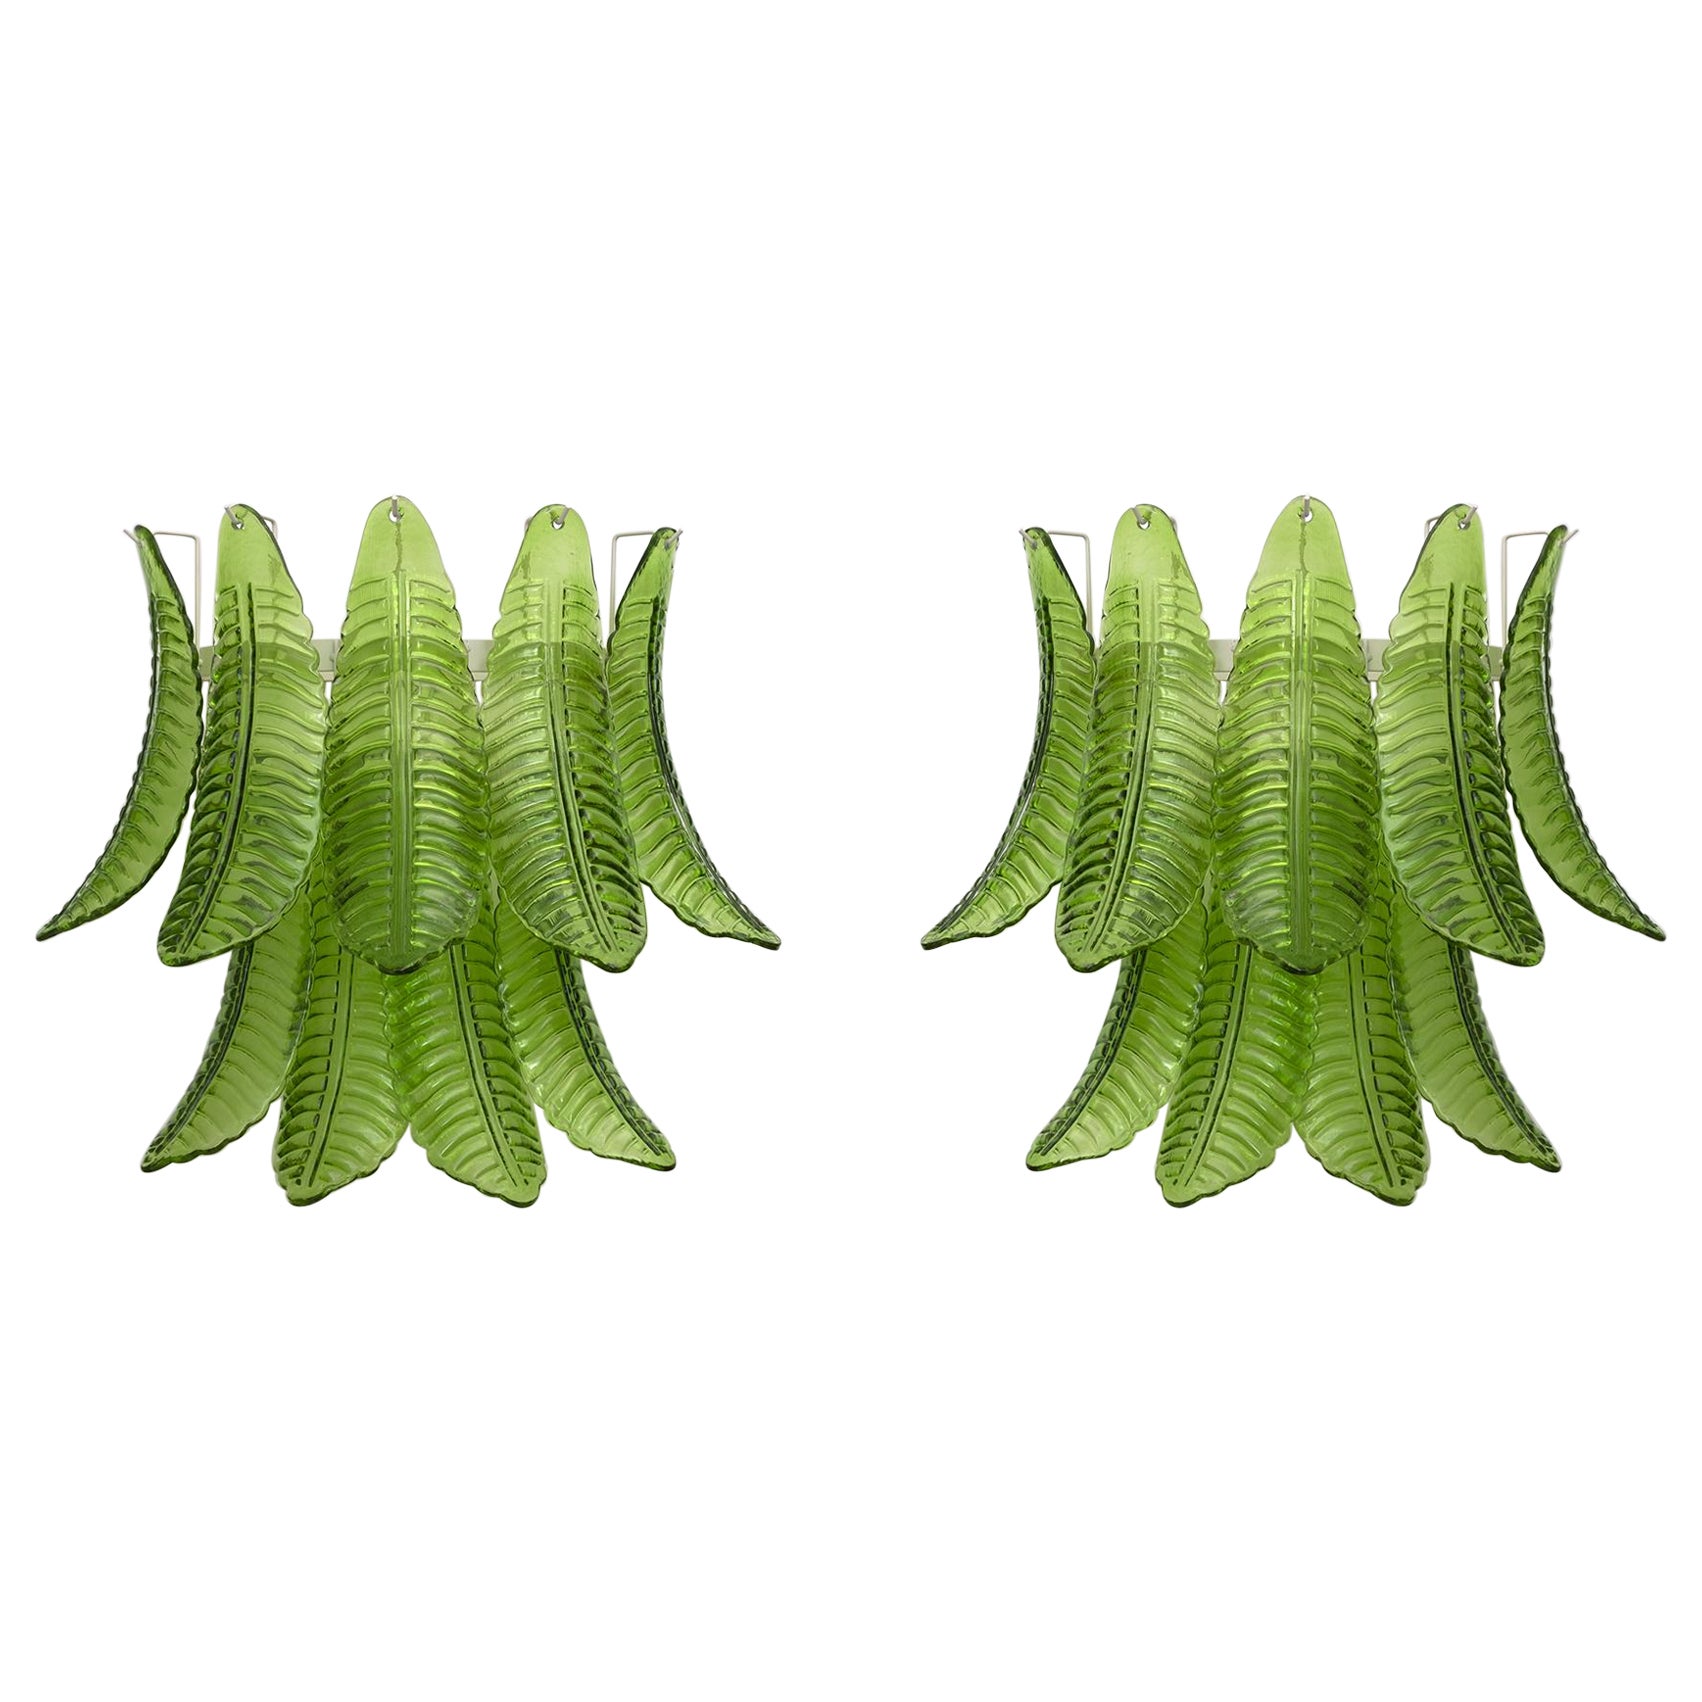 Pair of Mid-Century Modern Italian Murano Glass Palm Leaf Sconces, 1970s For Sale